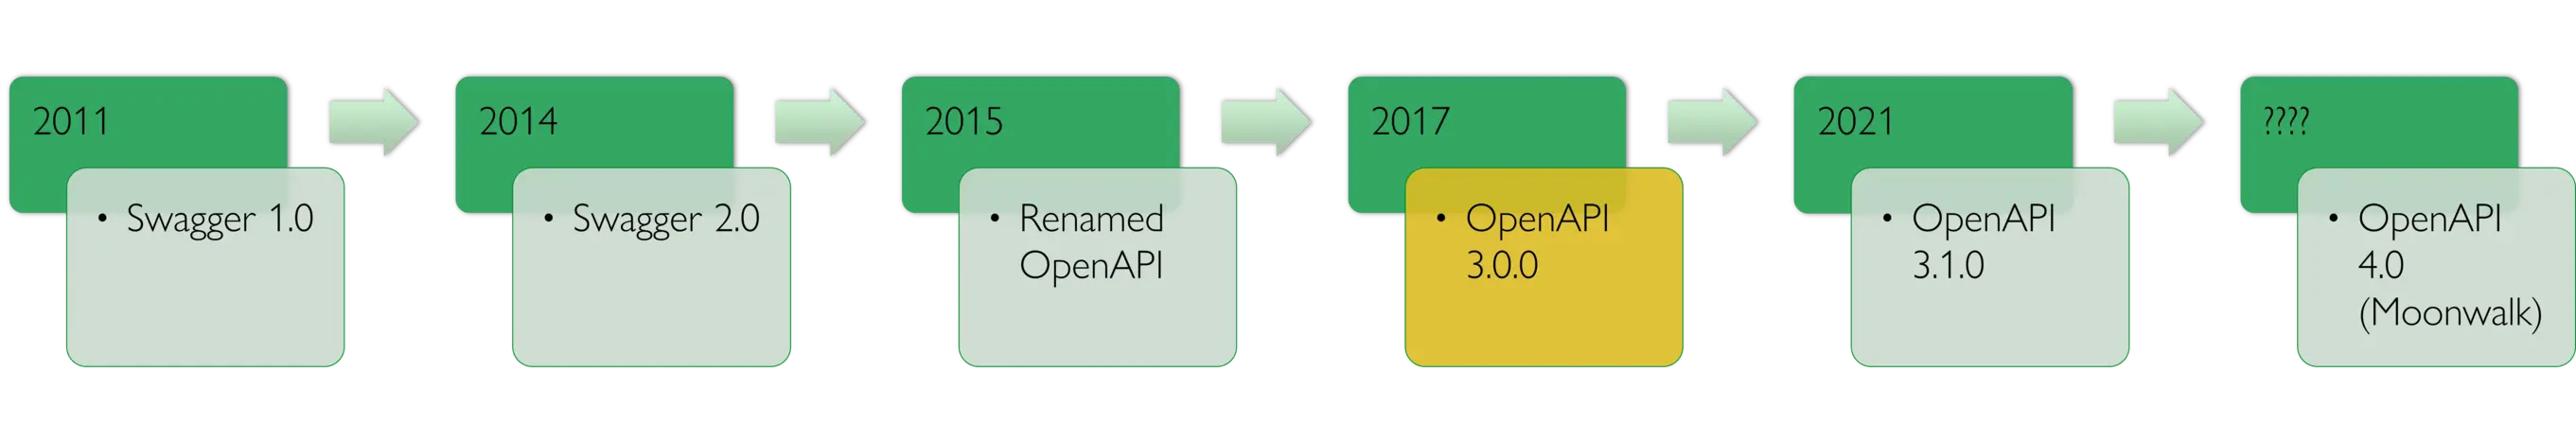 A timeline of the history of OpenAPI.